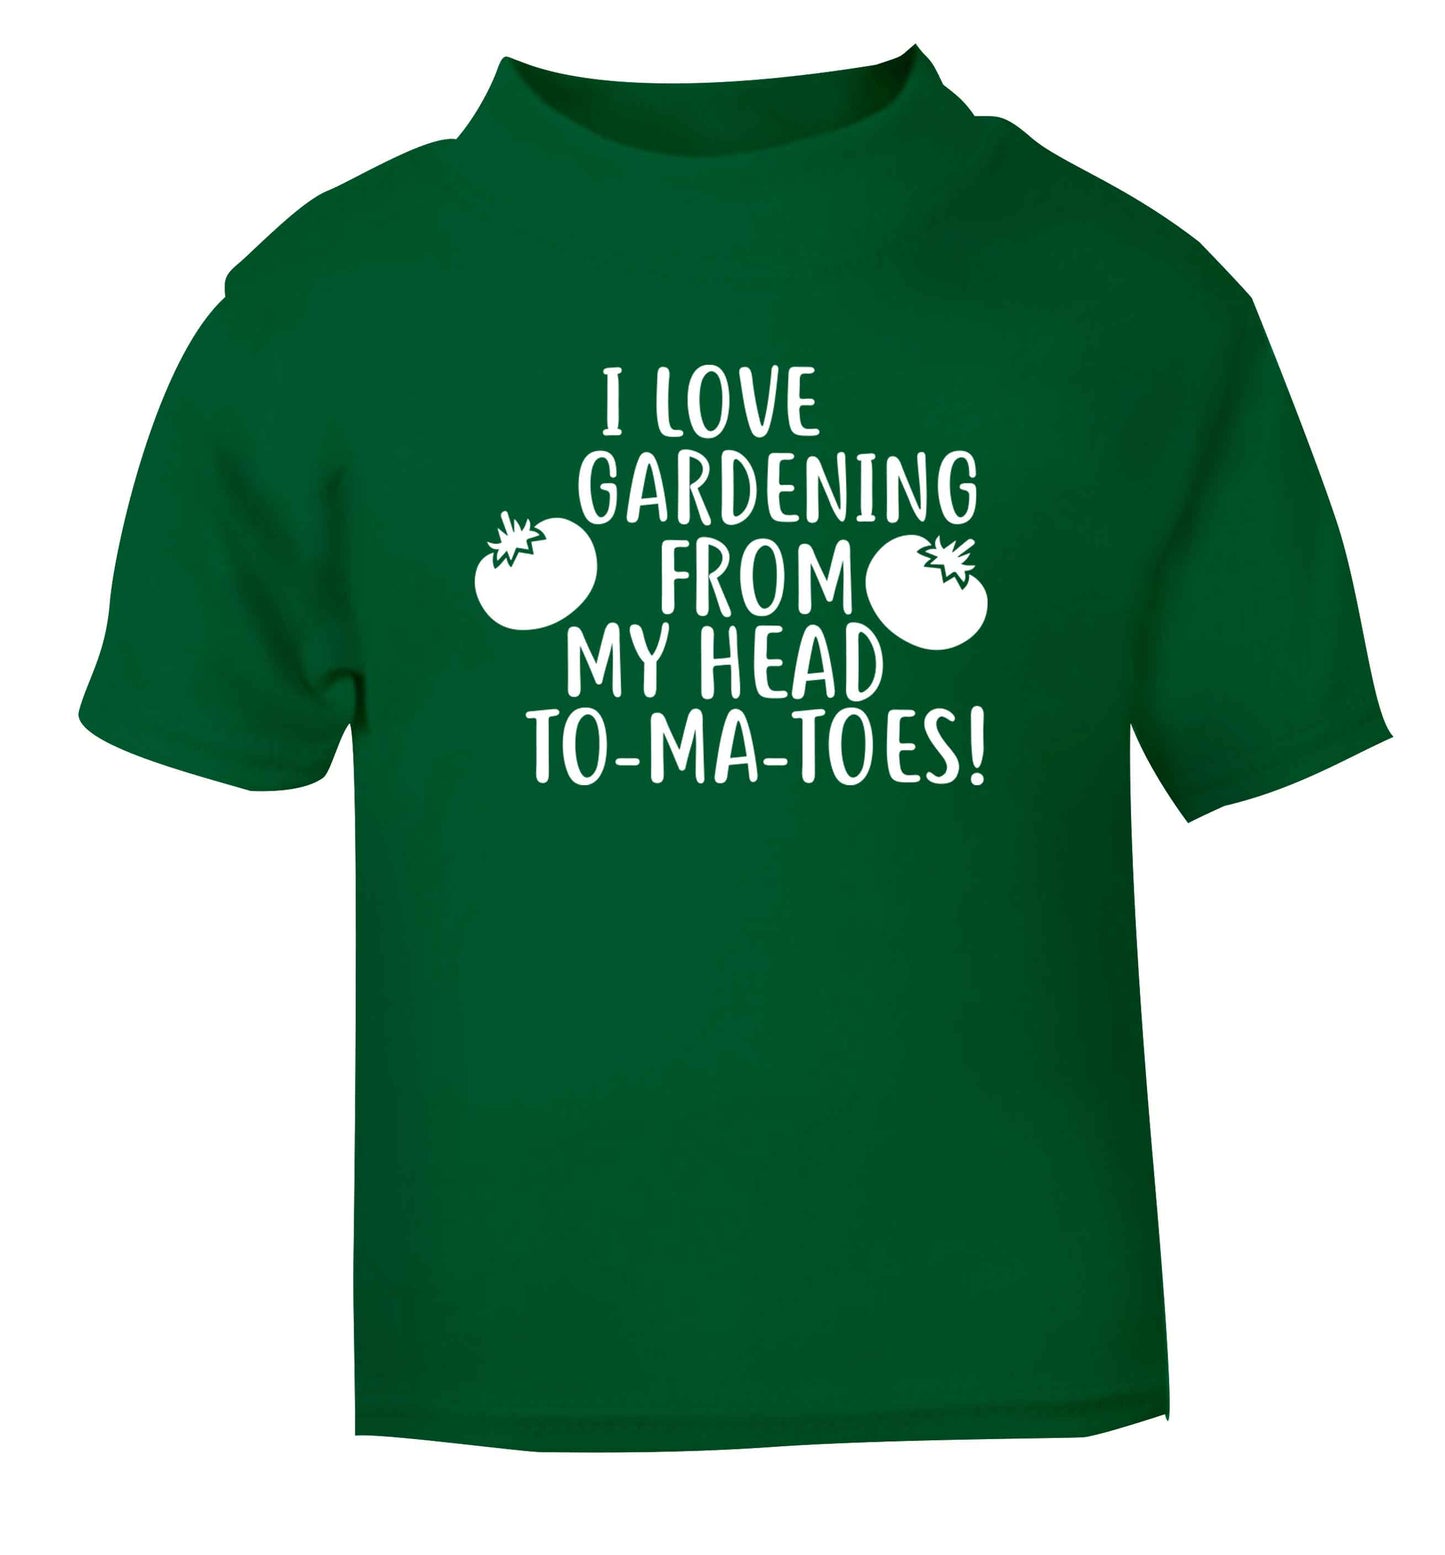 I love gardening from my head to-ma-toes green Baby Toddler Tshirt 2 Years